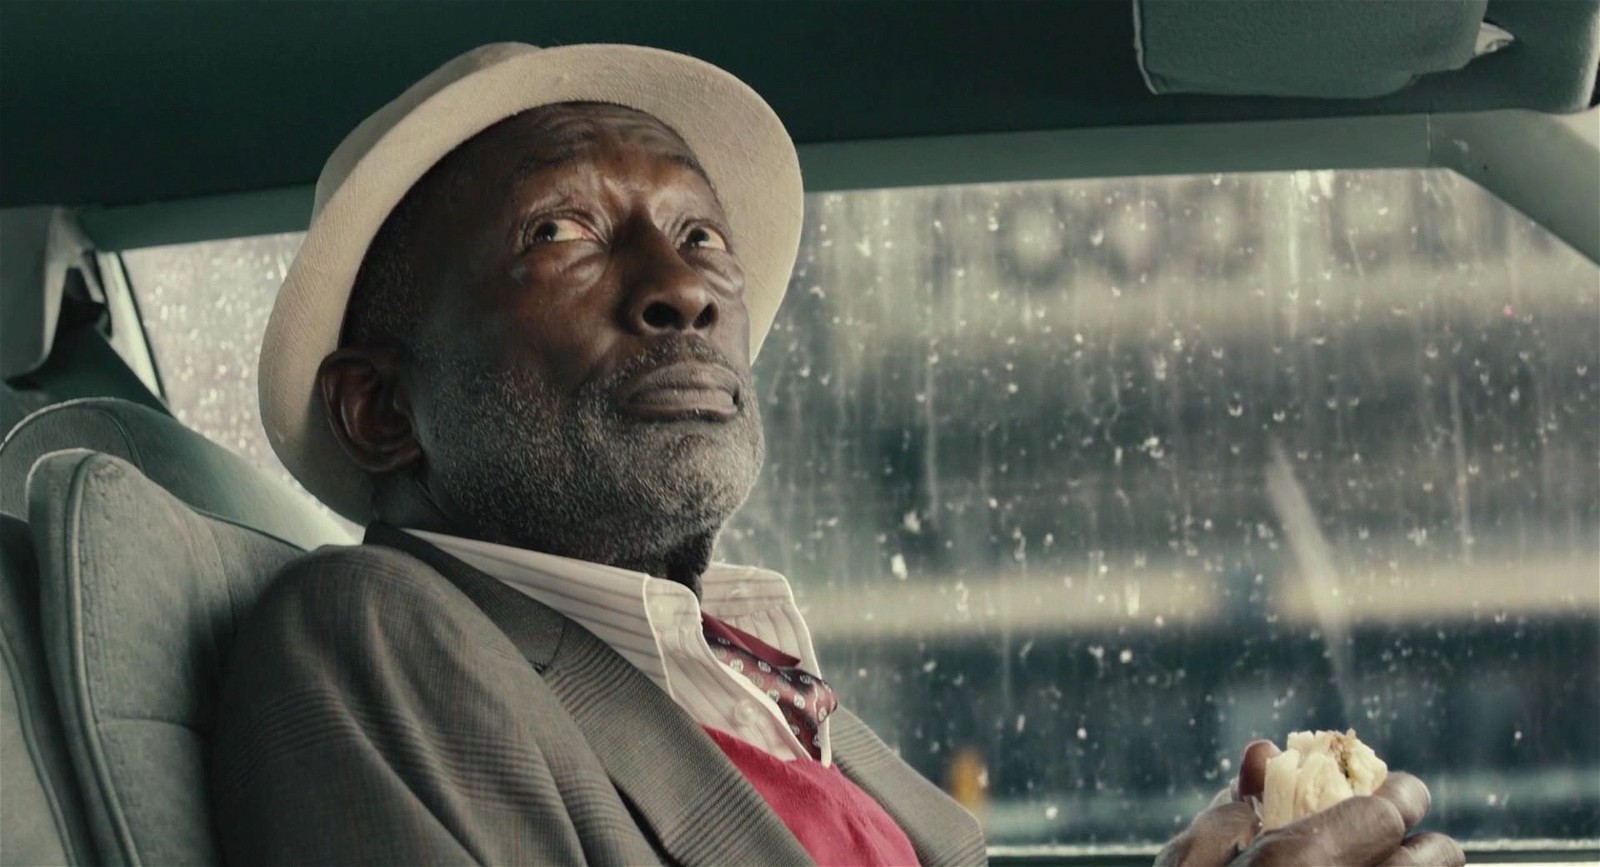 Garrett Morris played a taxi driver in a small scene from Ant-Man